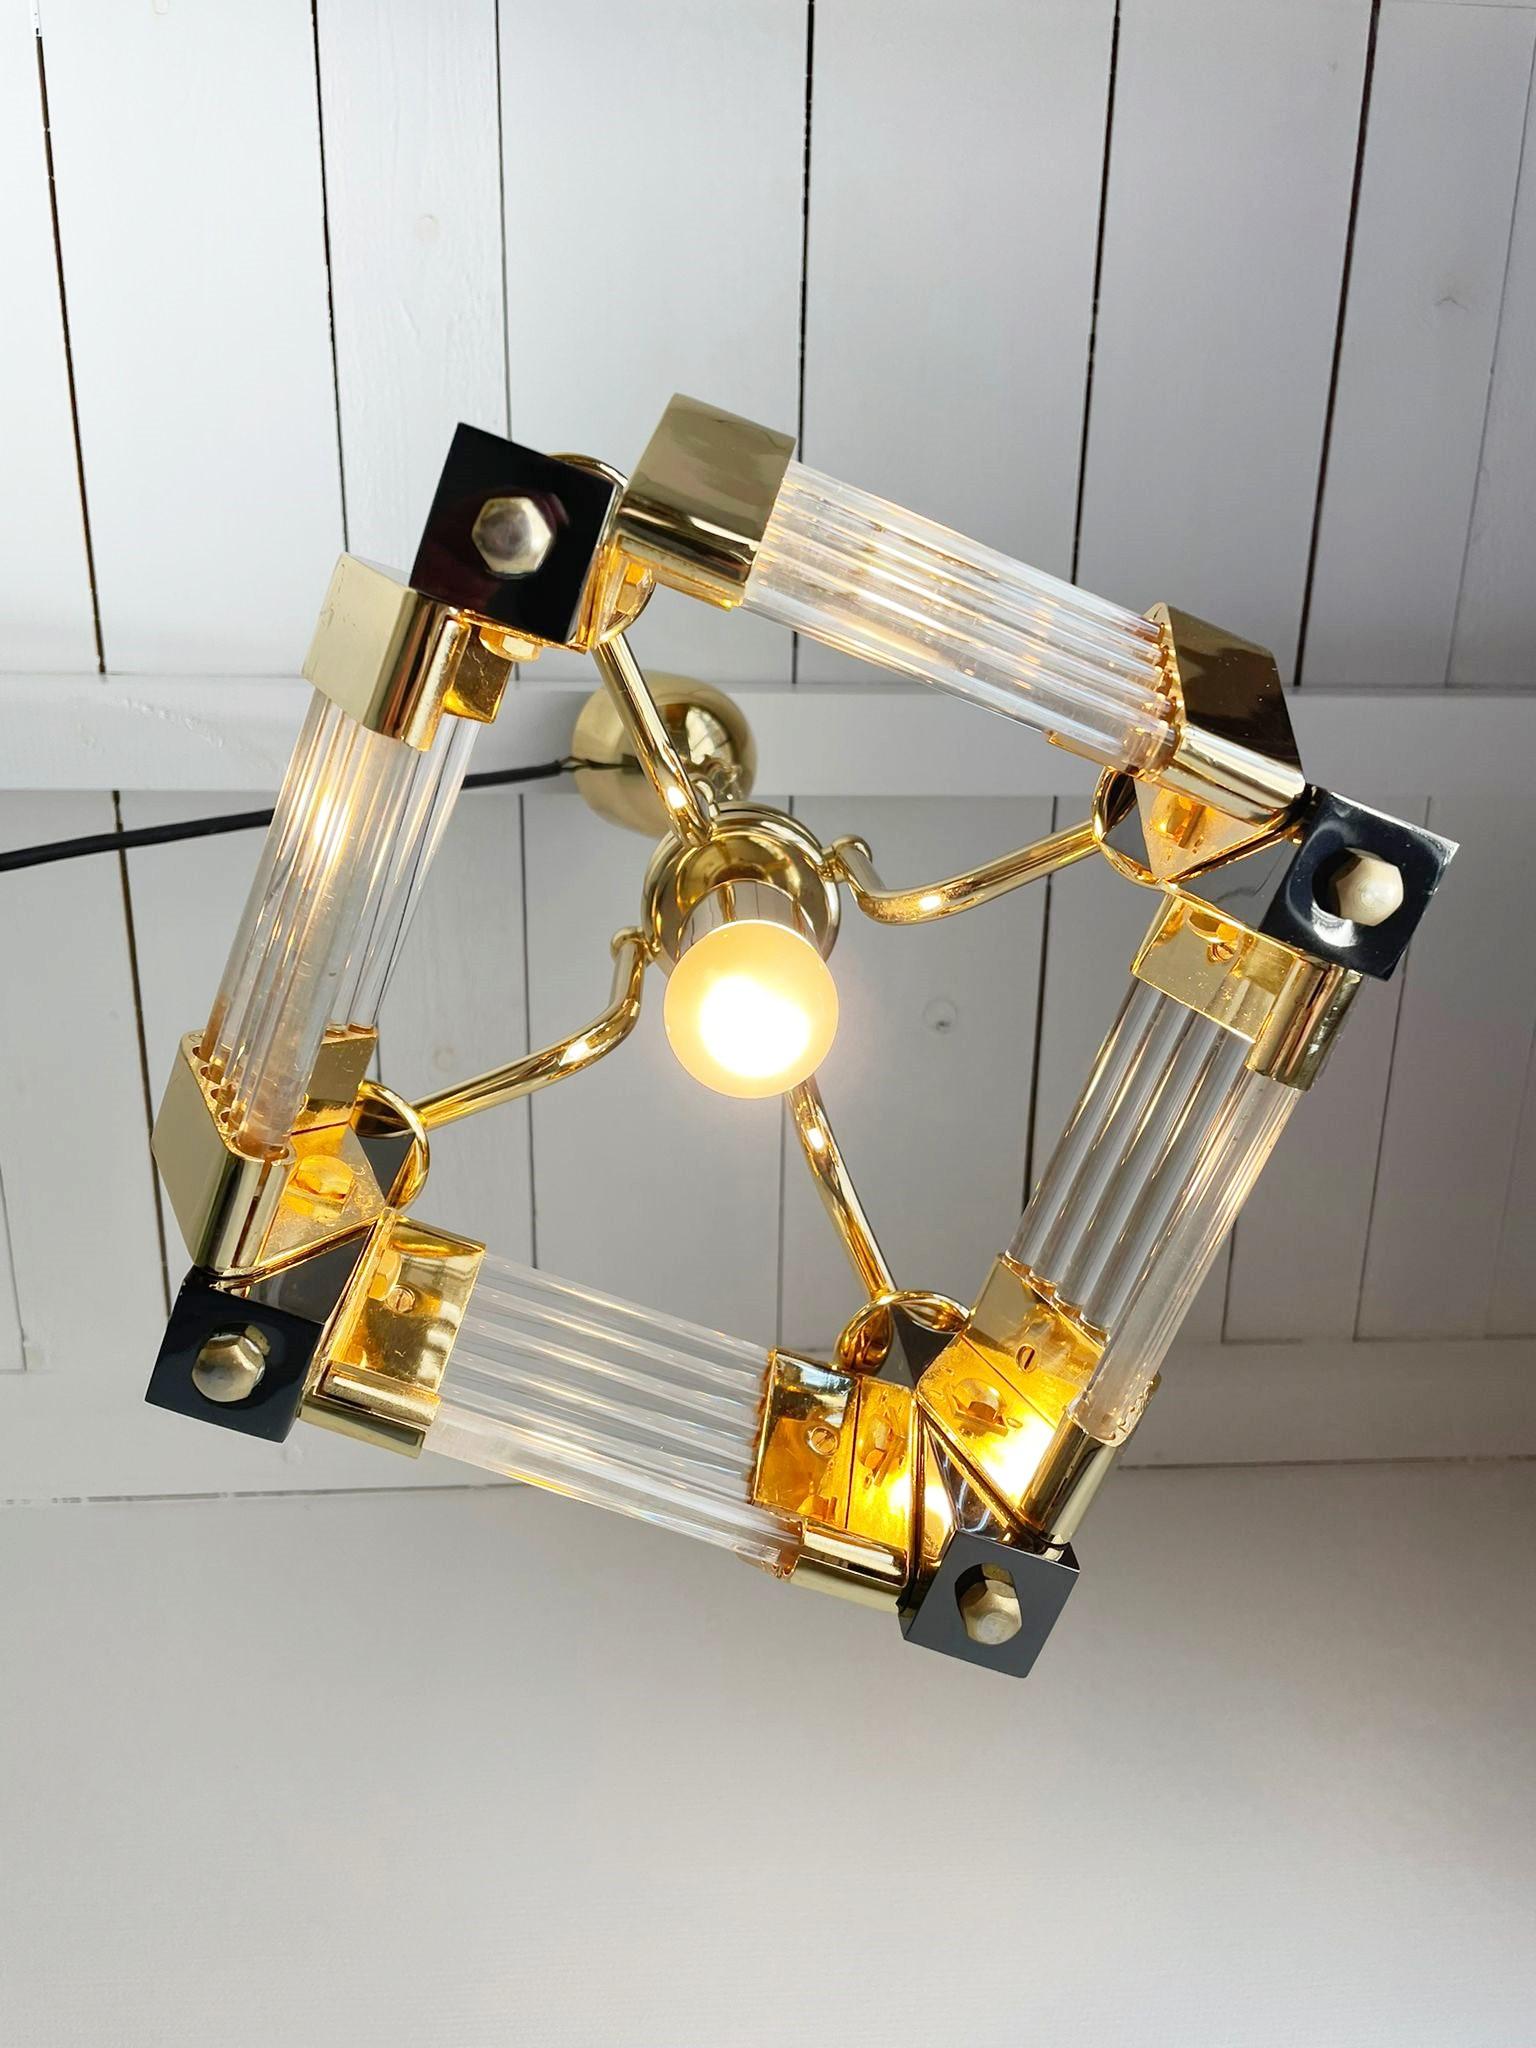 Elegant brass and cut crystal chandelier by Bakalowits & Sohne.

The chandelier emits a beautiful light.

The lamp is fitted with a E27 light bulb socket.

1980s - Austria

Measures: Height: 65cm/25.59